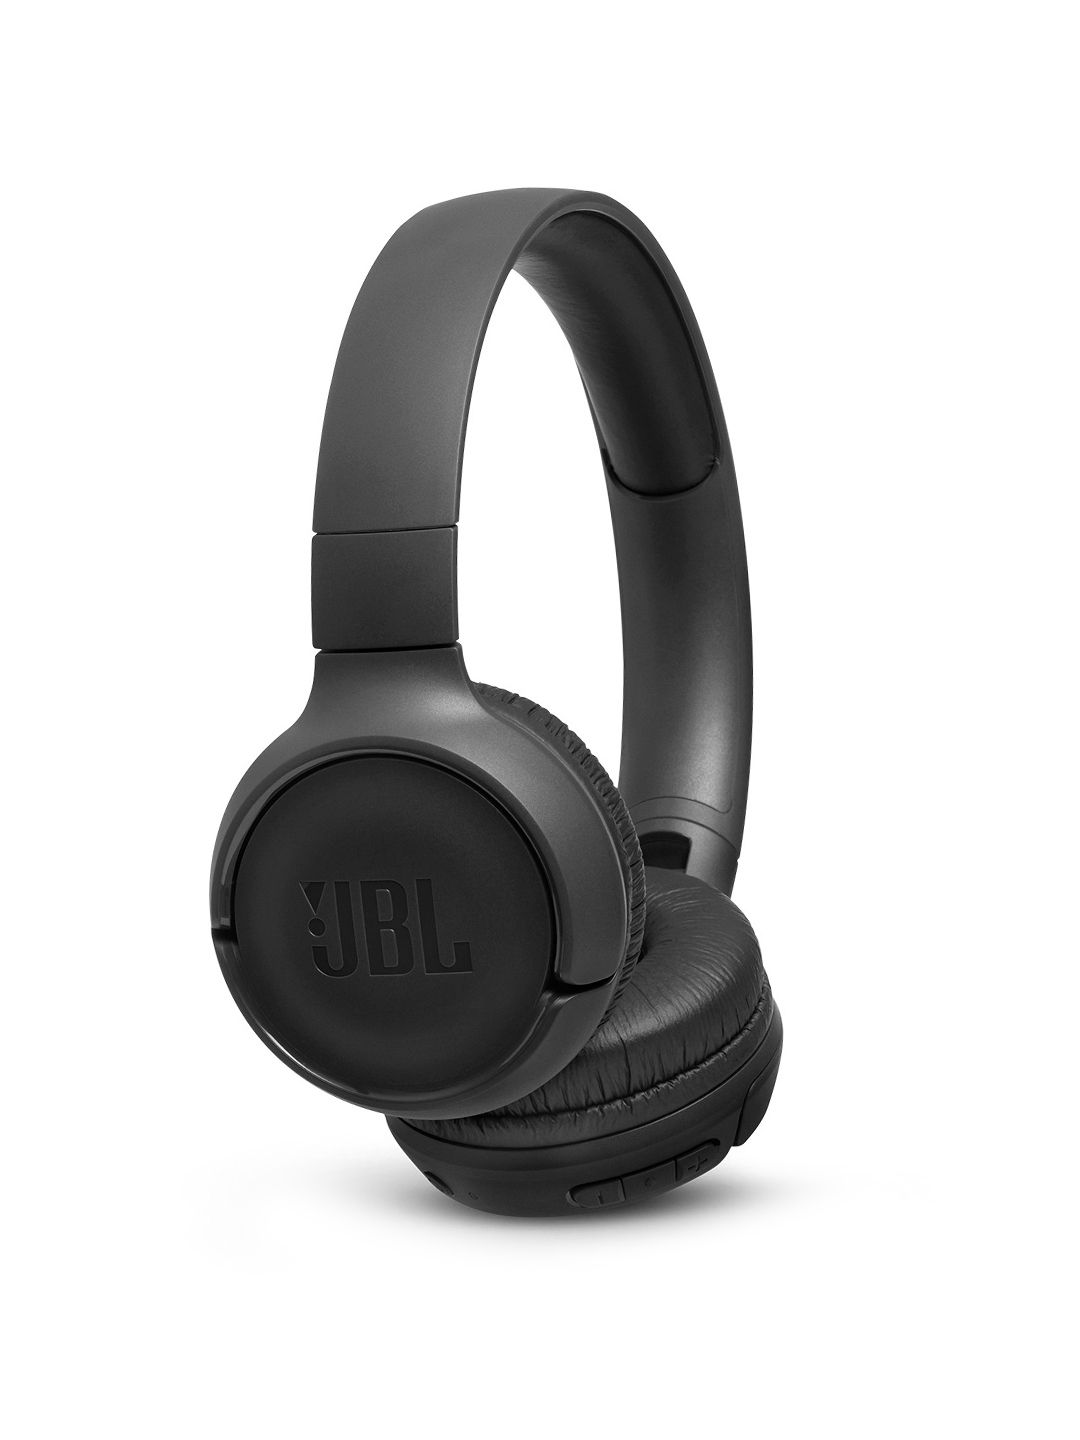 JBL Black T500BT M Powerful Bass Wireless On-Ear Headphones with Mic Price in India